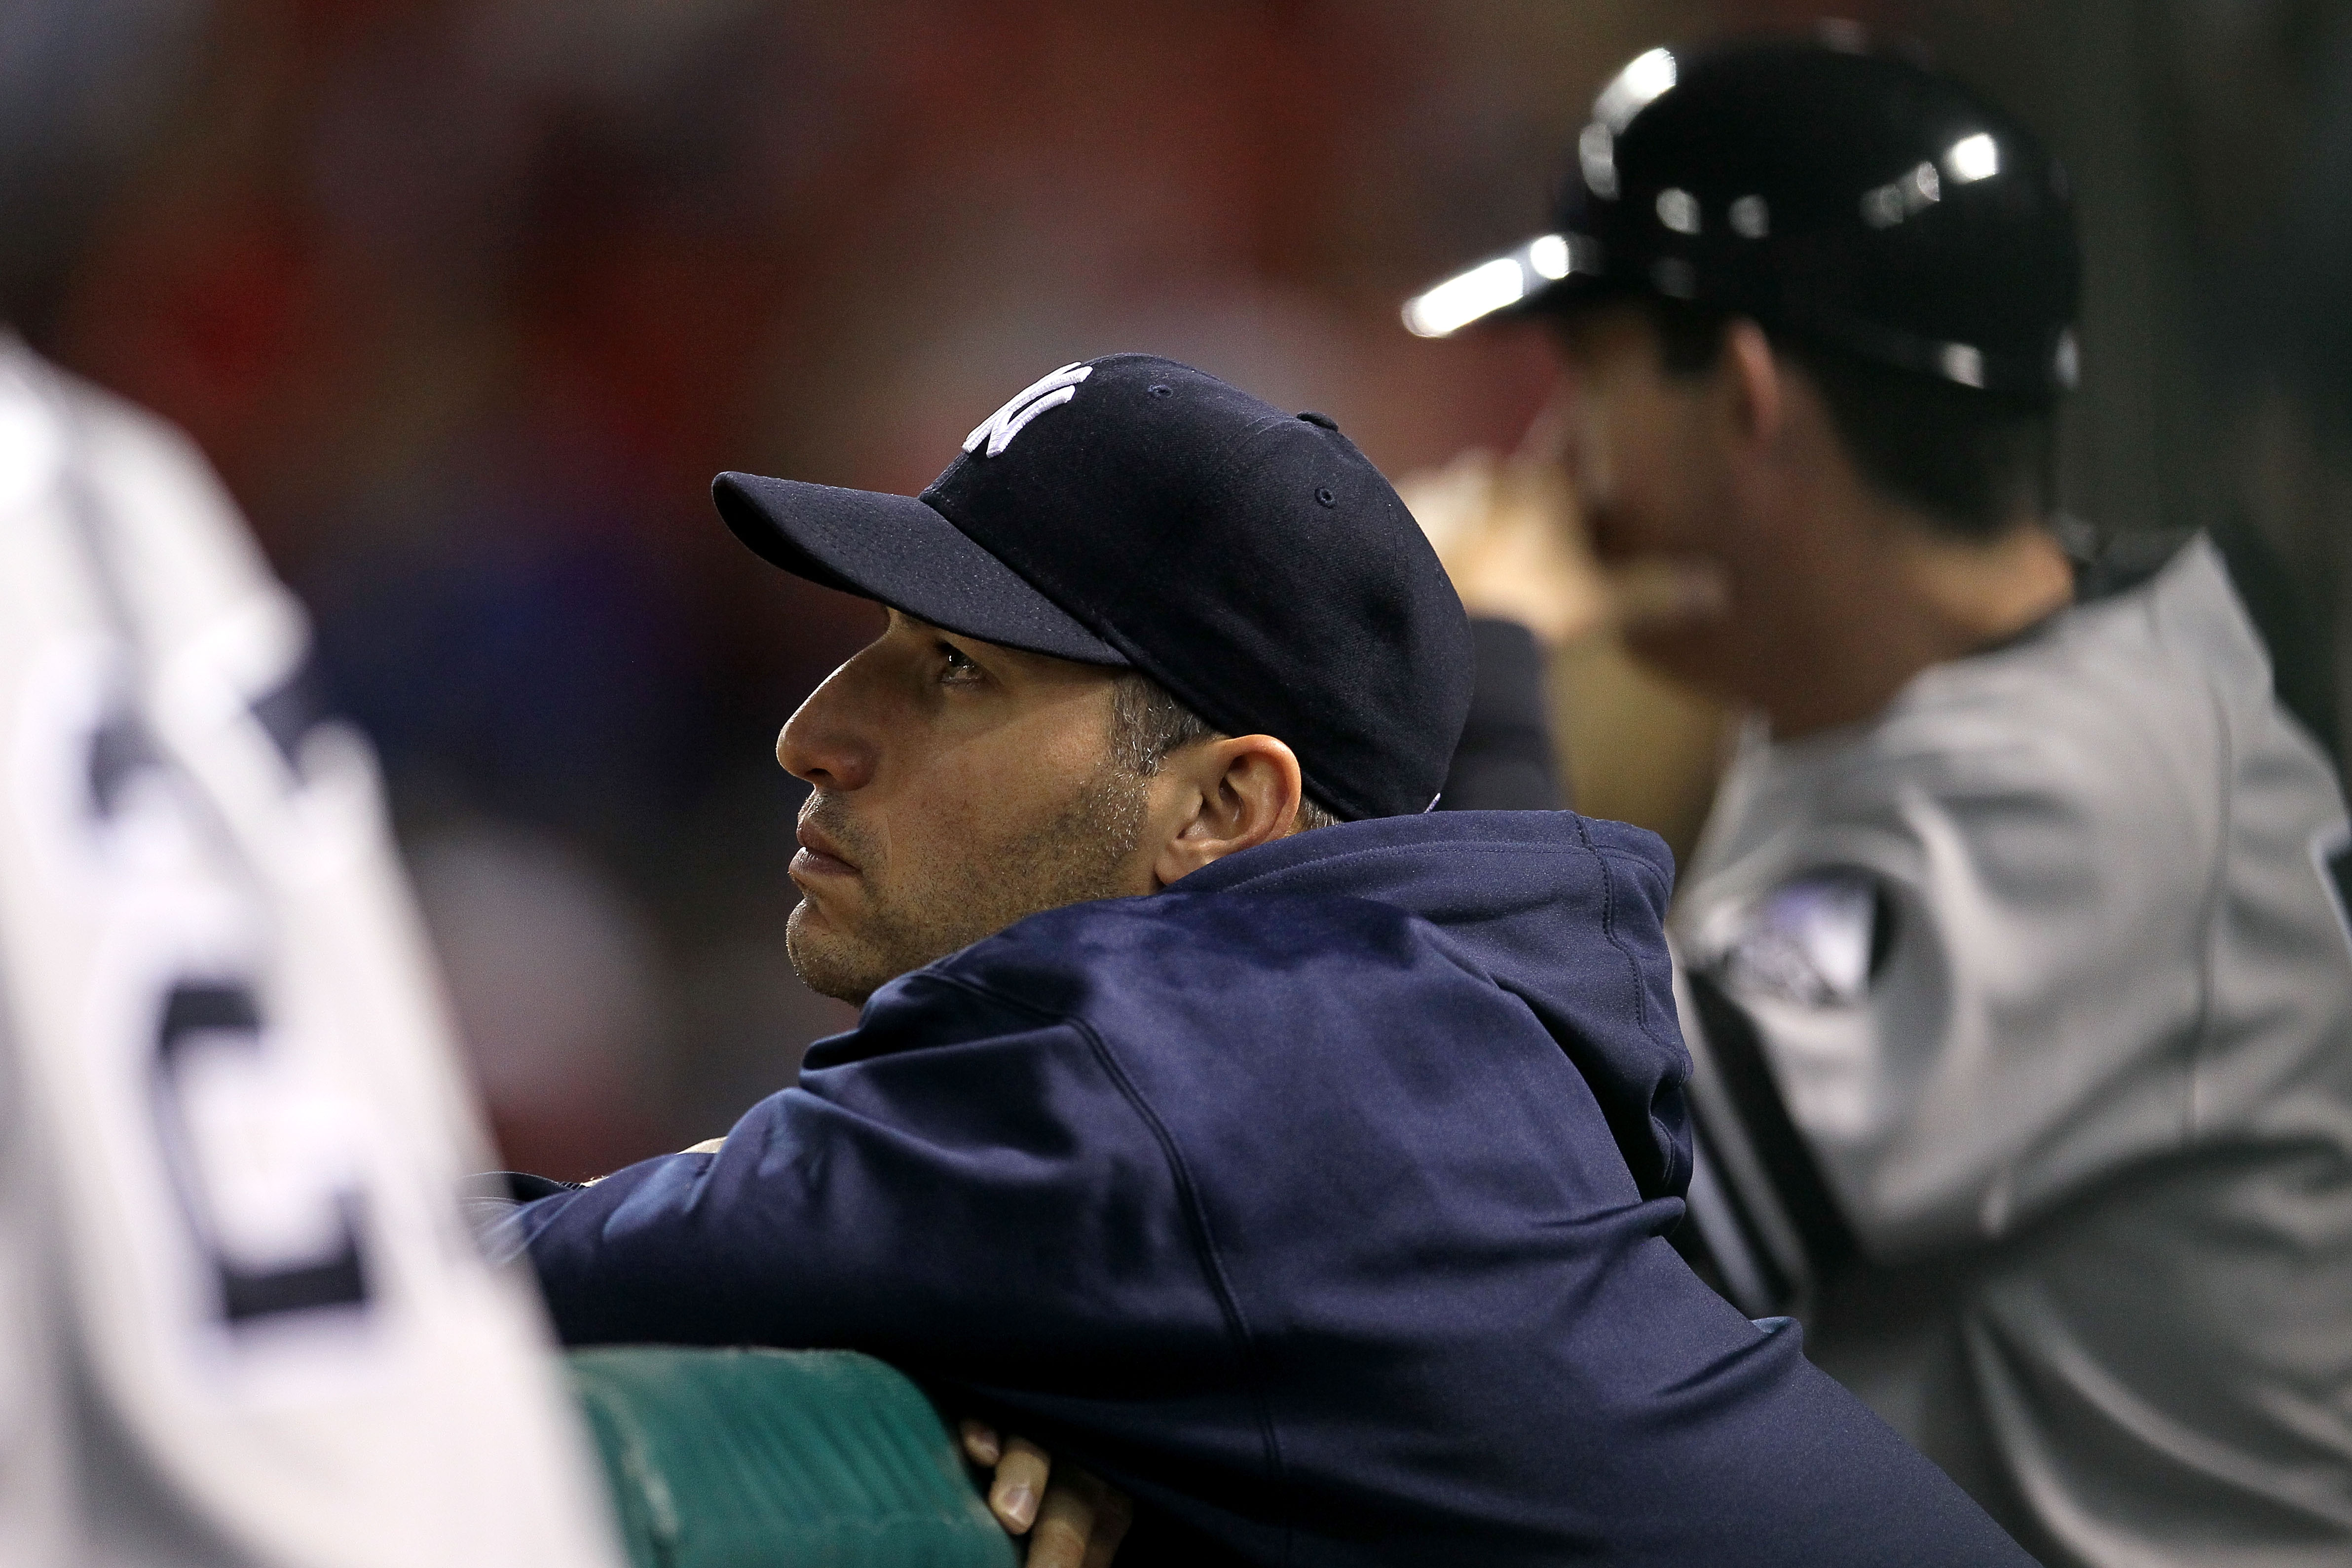 Hilarious Astros error helps Andy Pettitte finish his career with a win